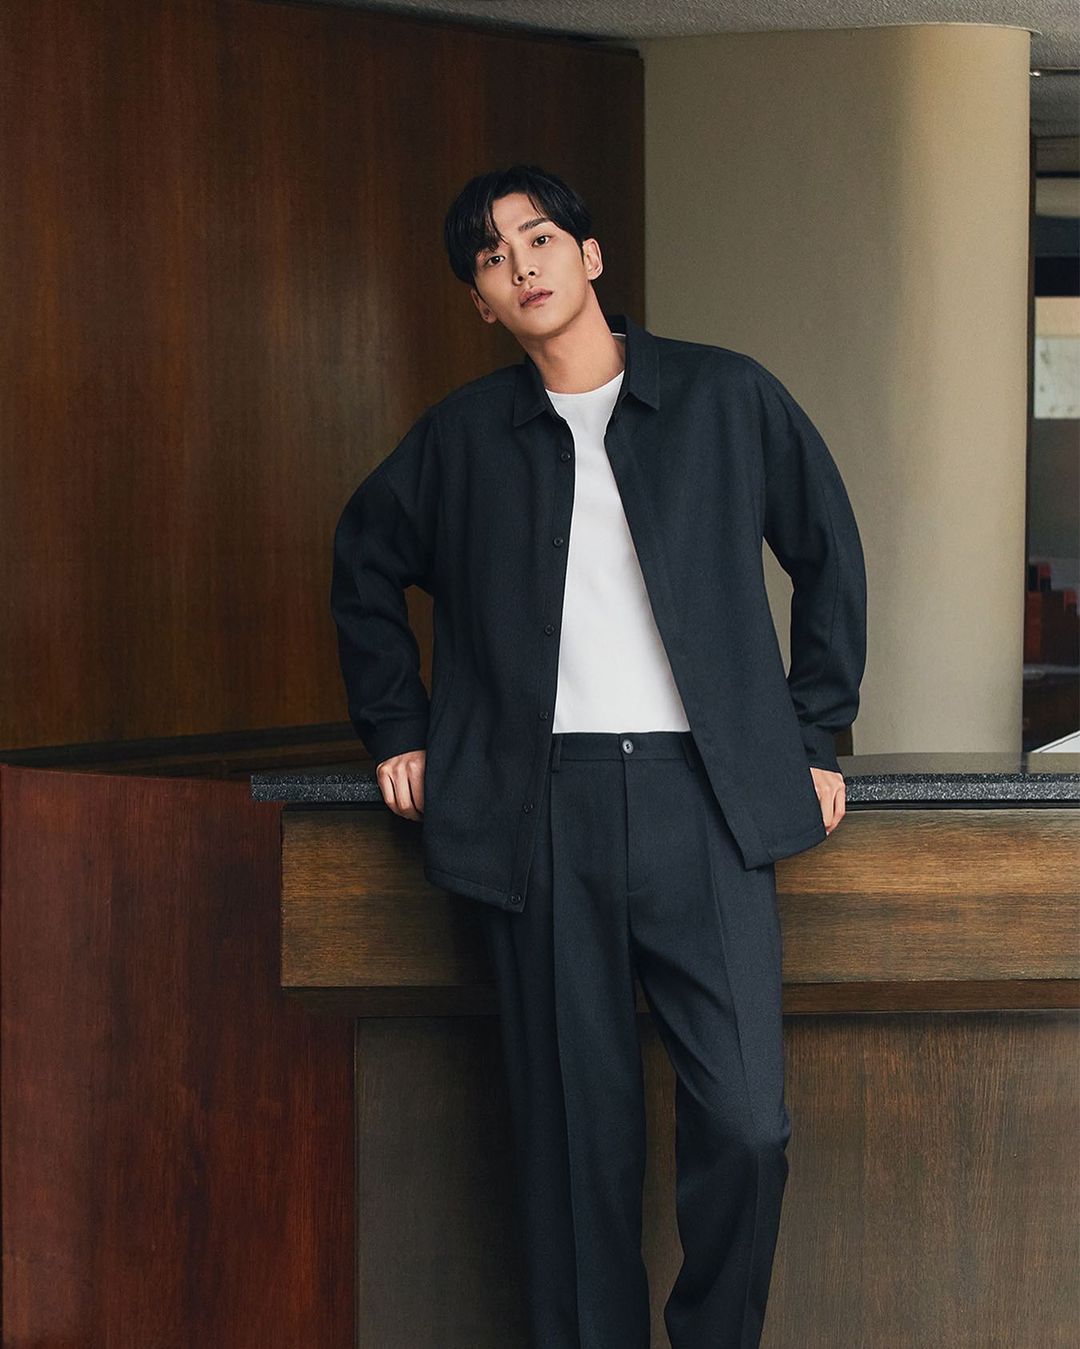 Rowoon, the standard of refreshing charm